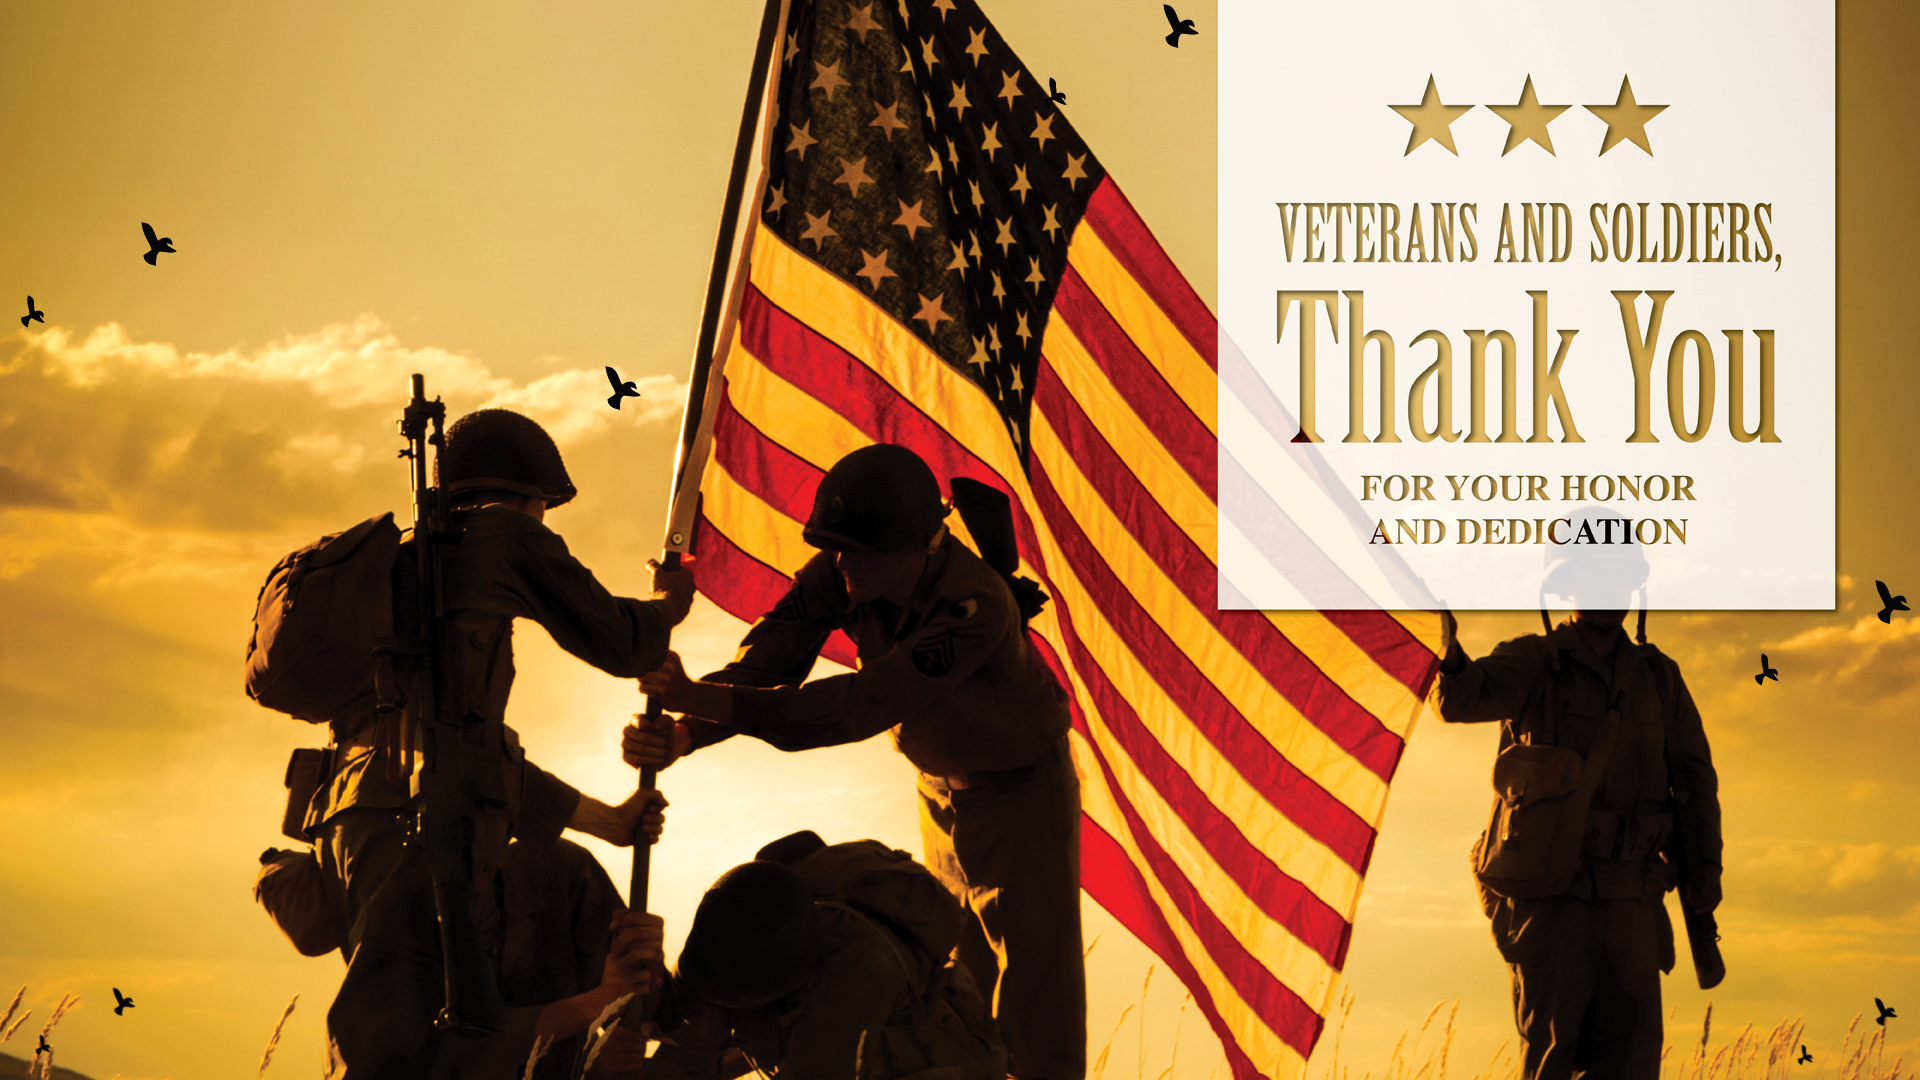 Thank You Veterans Images & Wallpapers 2017 - My Site